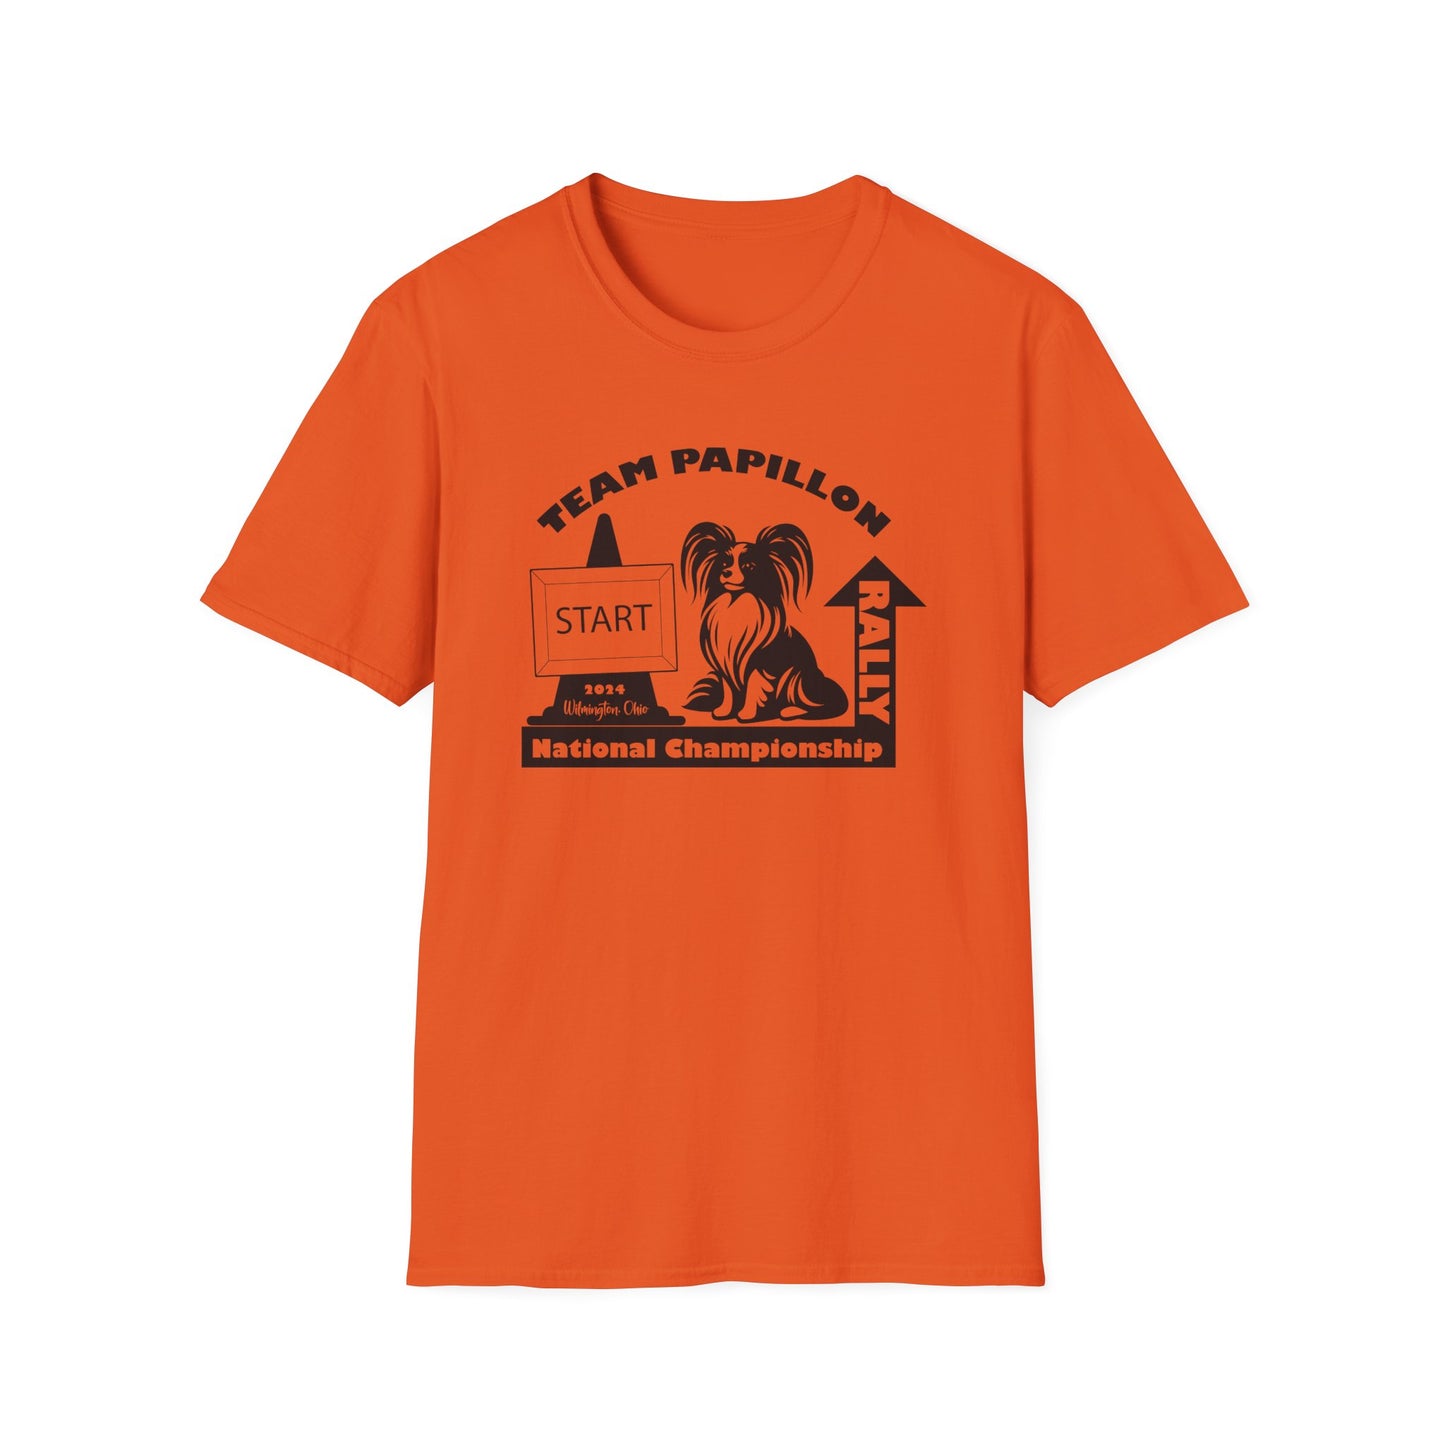 2 RALLY NATIONALS - Papillon Unisex Softstyle T-Shirt